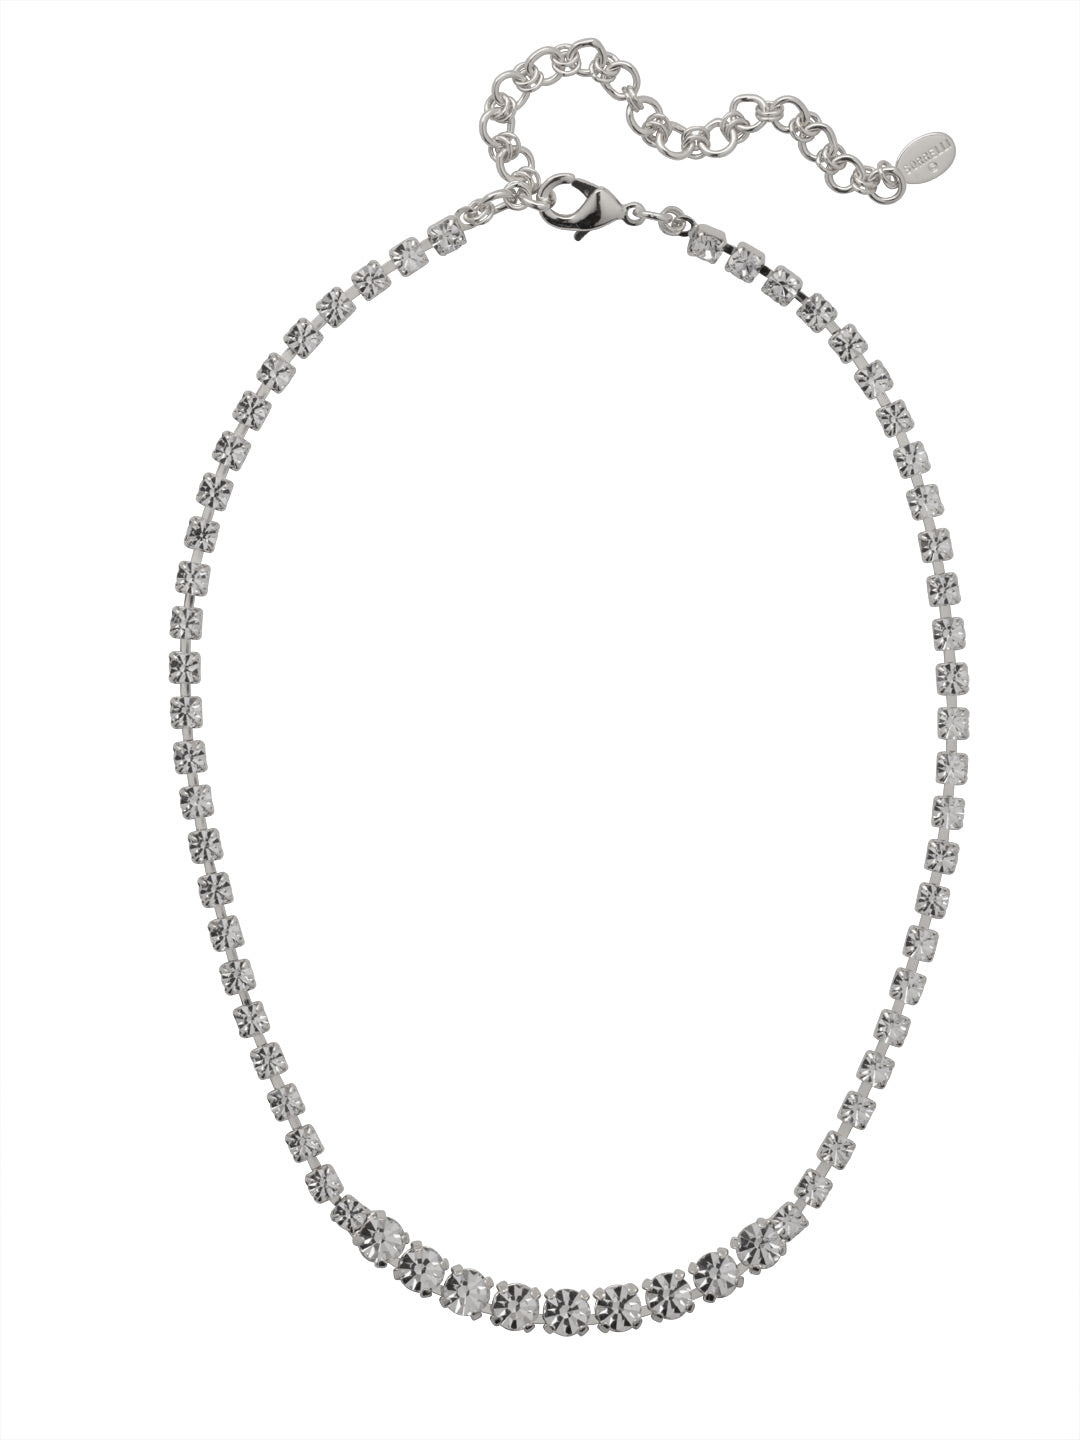 Audriana Tennis Necklace - NET37PDCRY